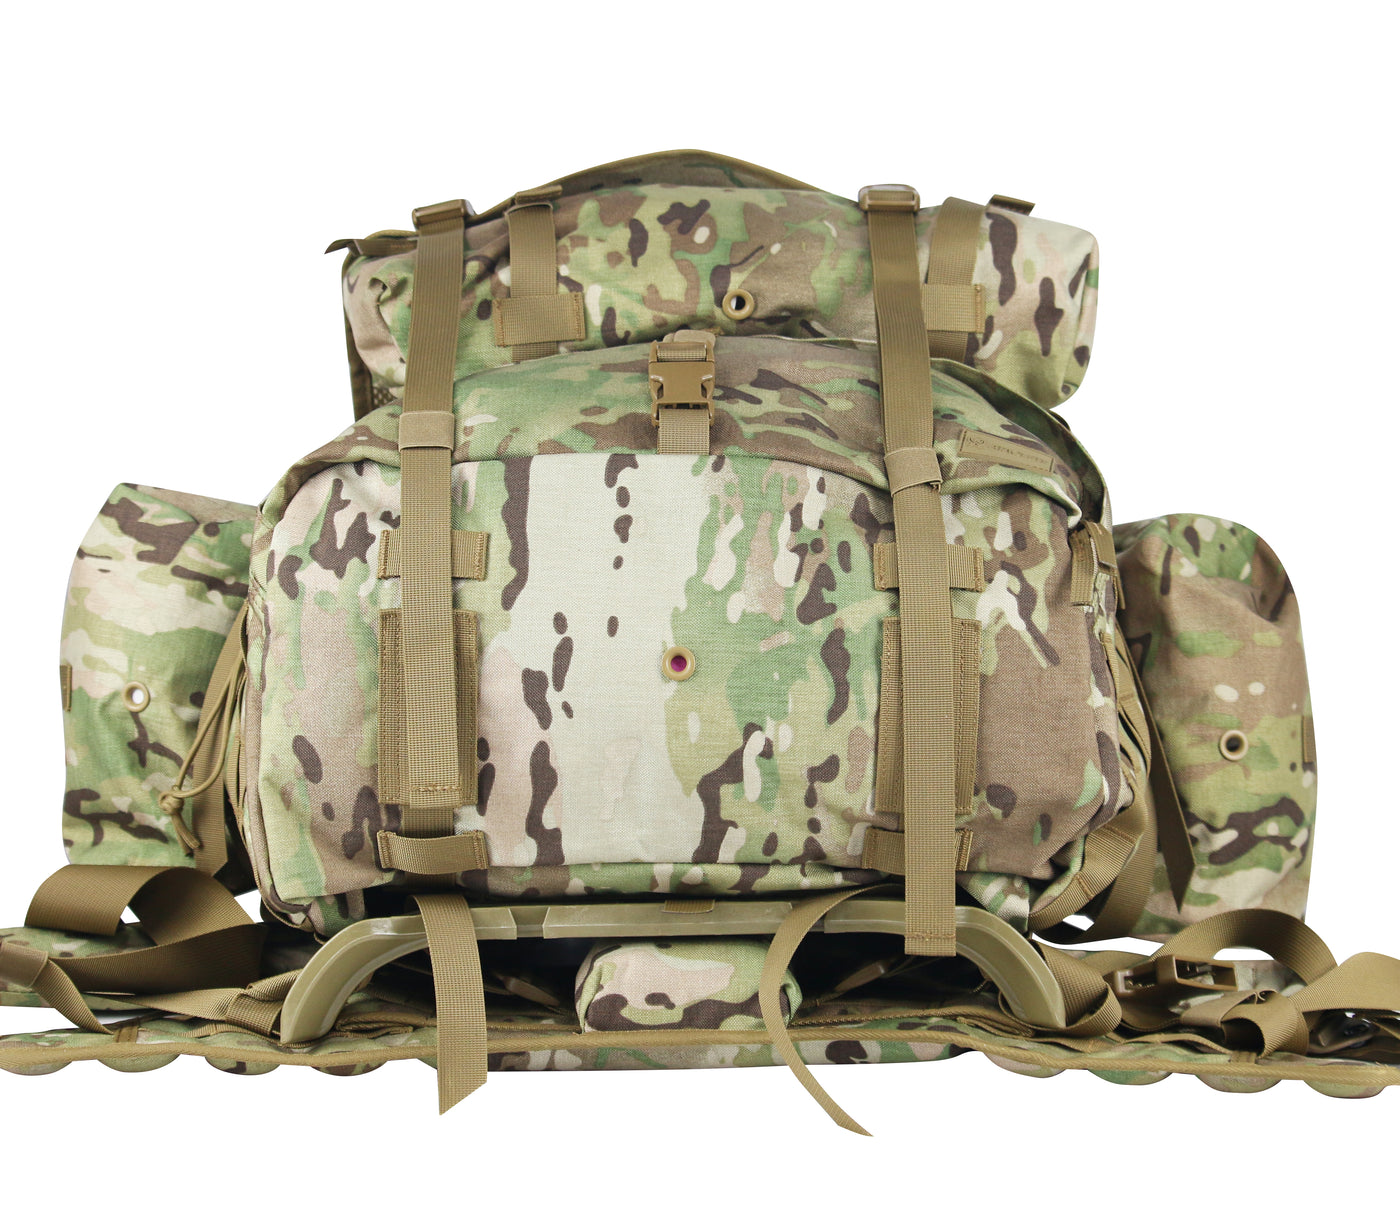 US Army MOLLE II Large Pack - Rucksack with Frame - OCP